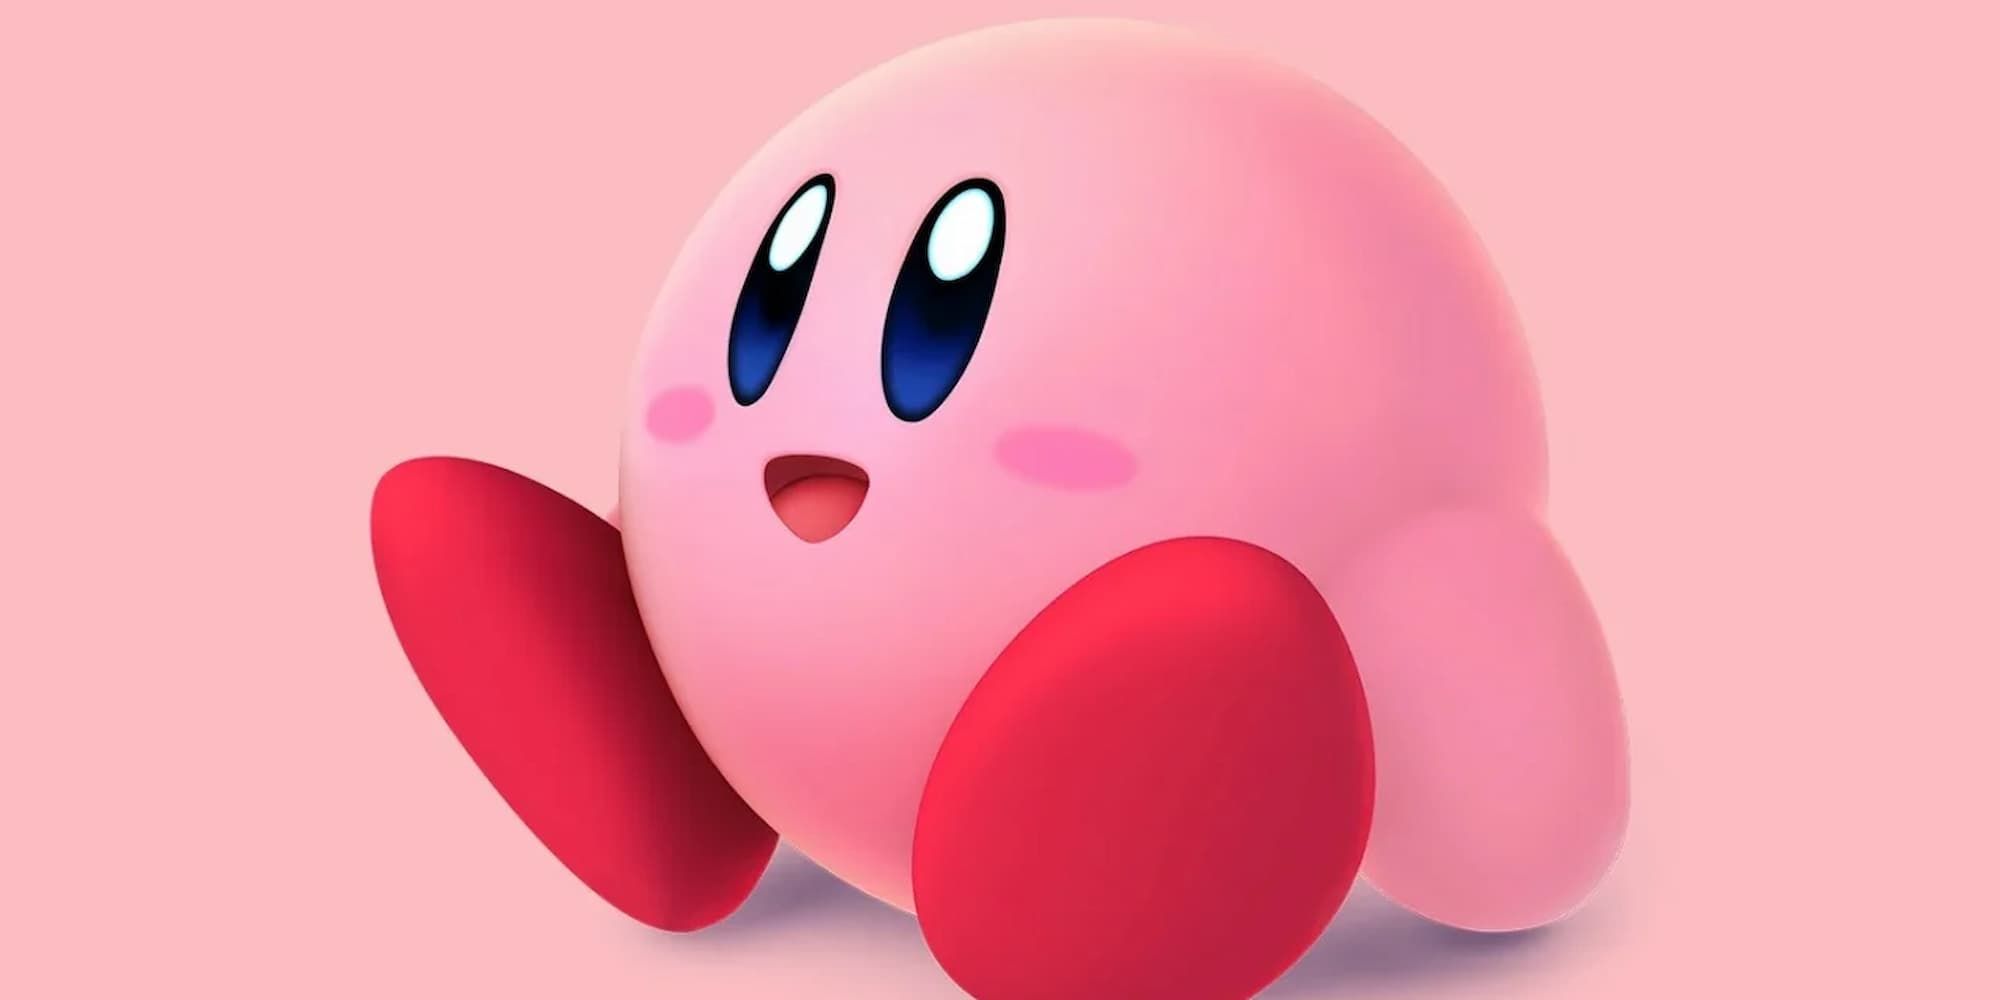 Kirby sits with wide eyes and an open-mouthed smile.